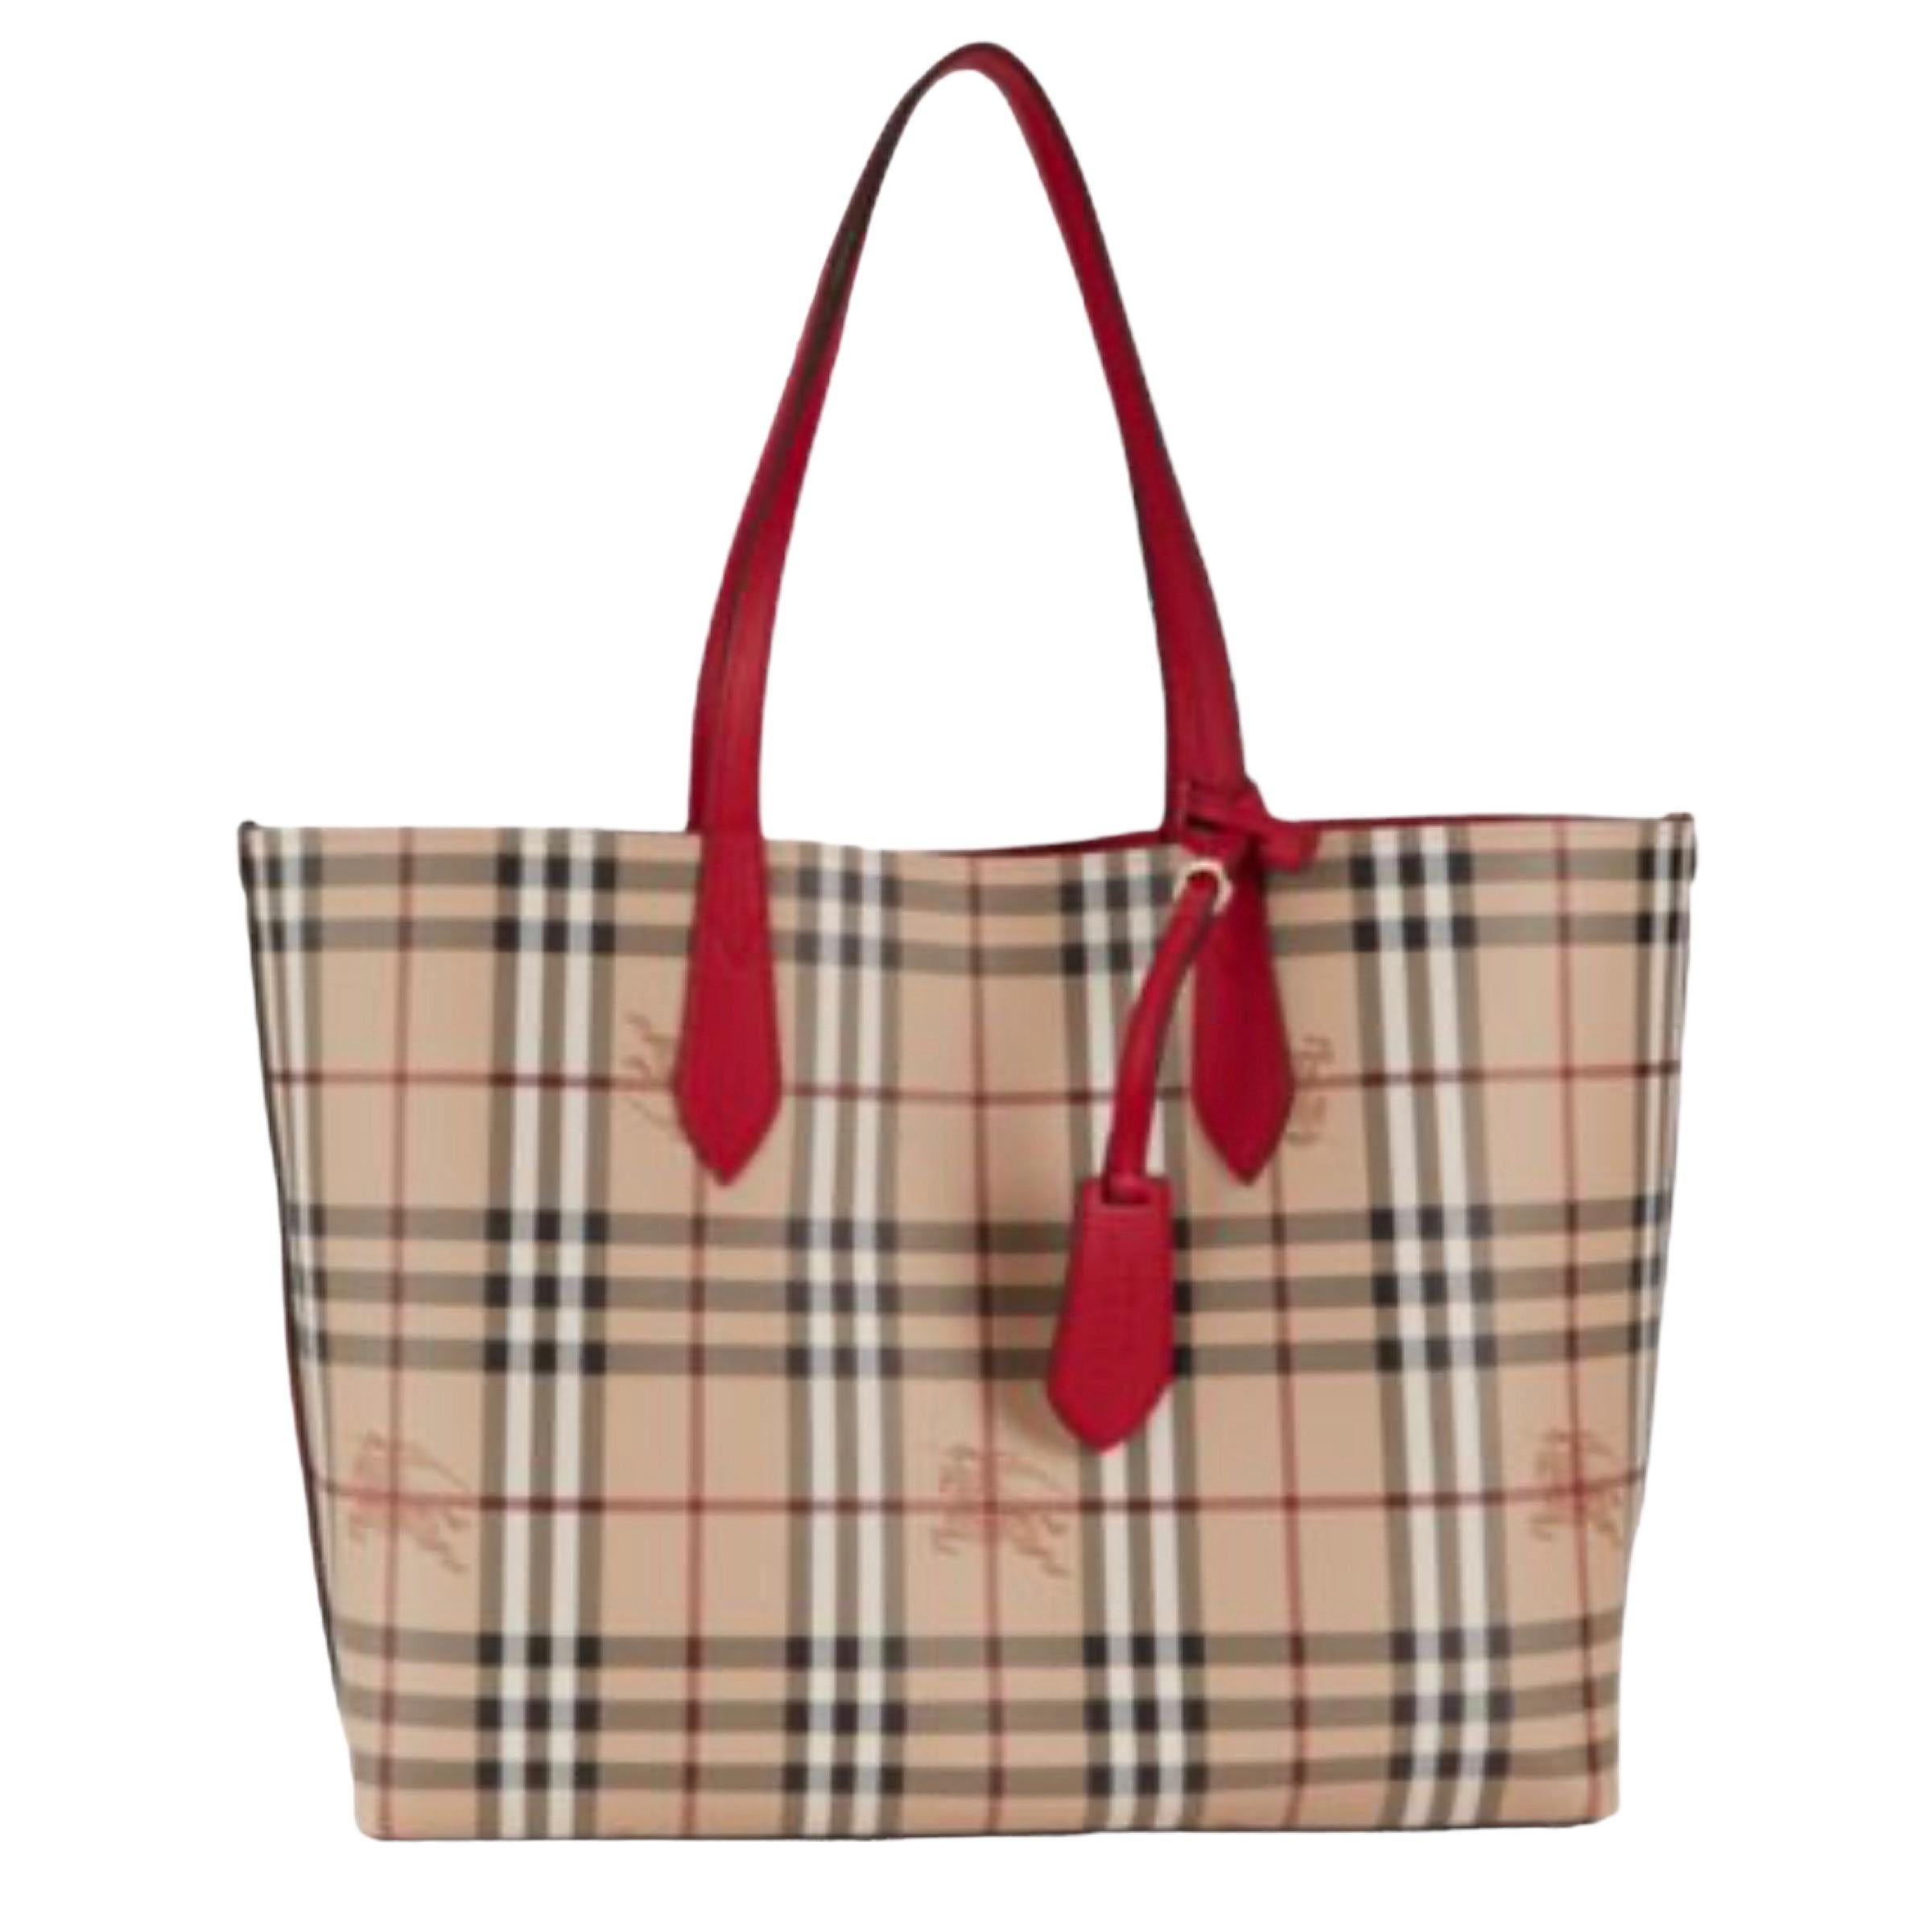 NEW Burberry Red Haymarket Check Reversible Leather Tote Shoulder Bag For Sale 8